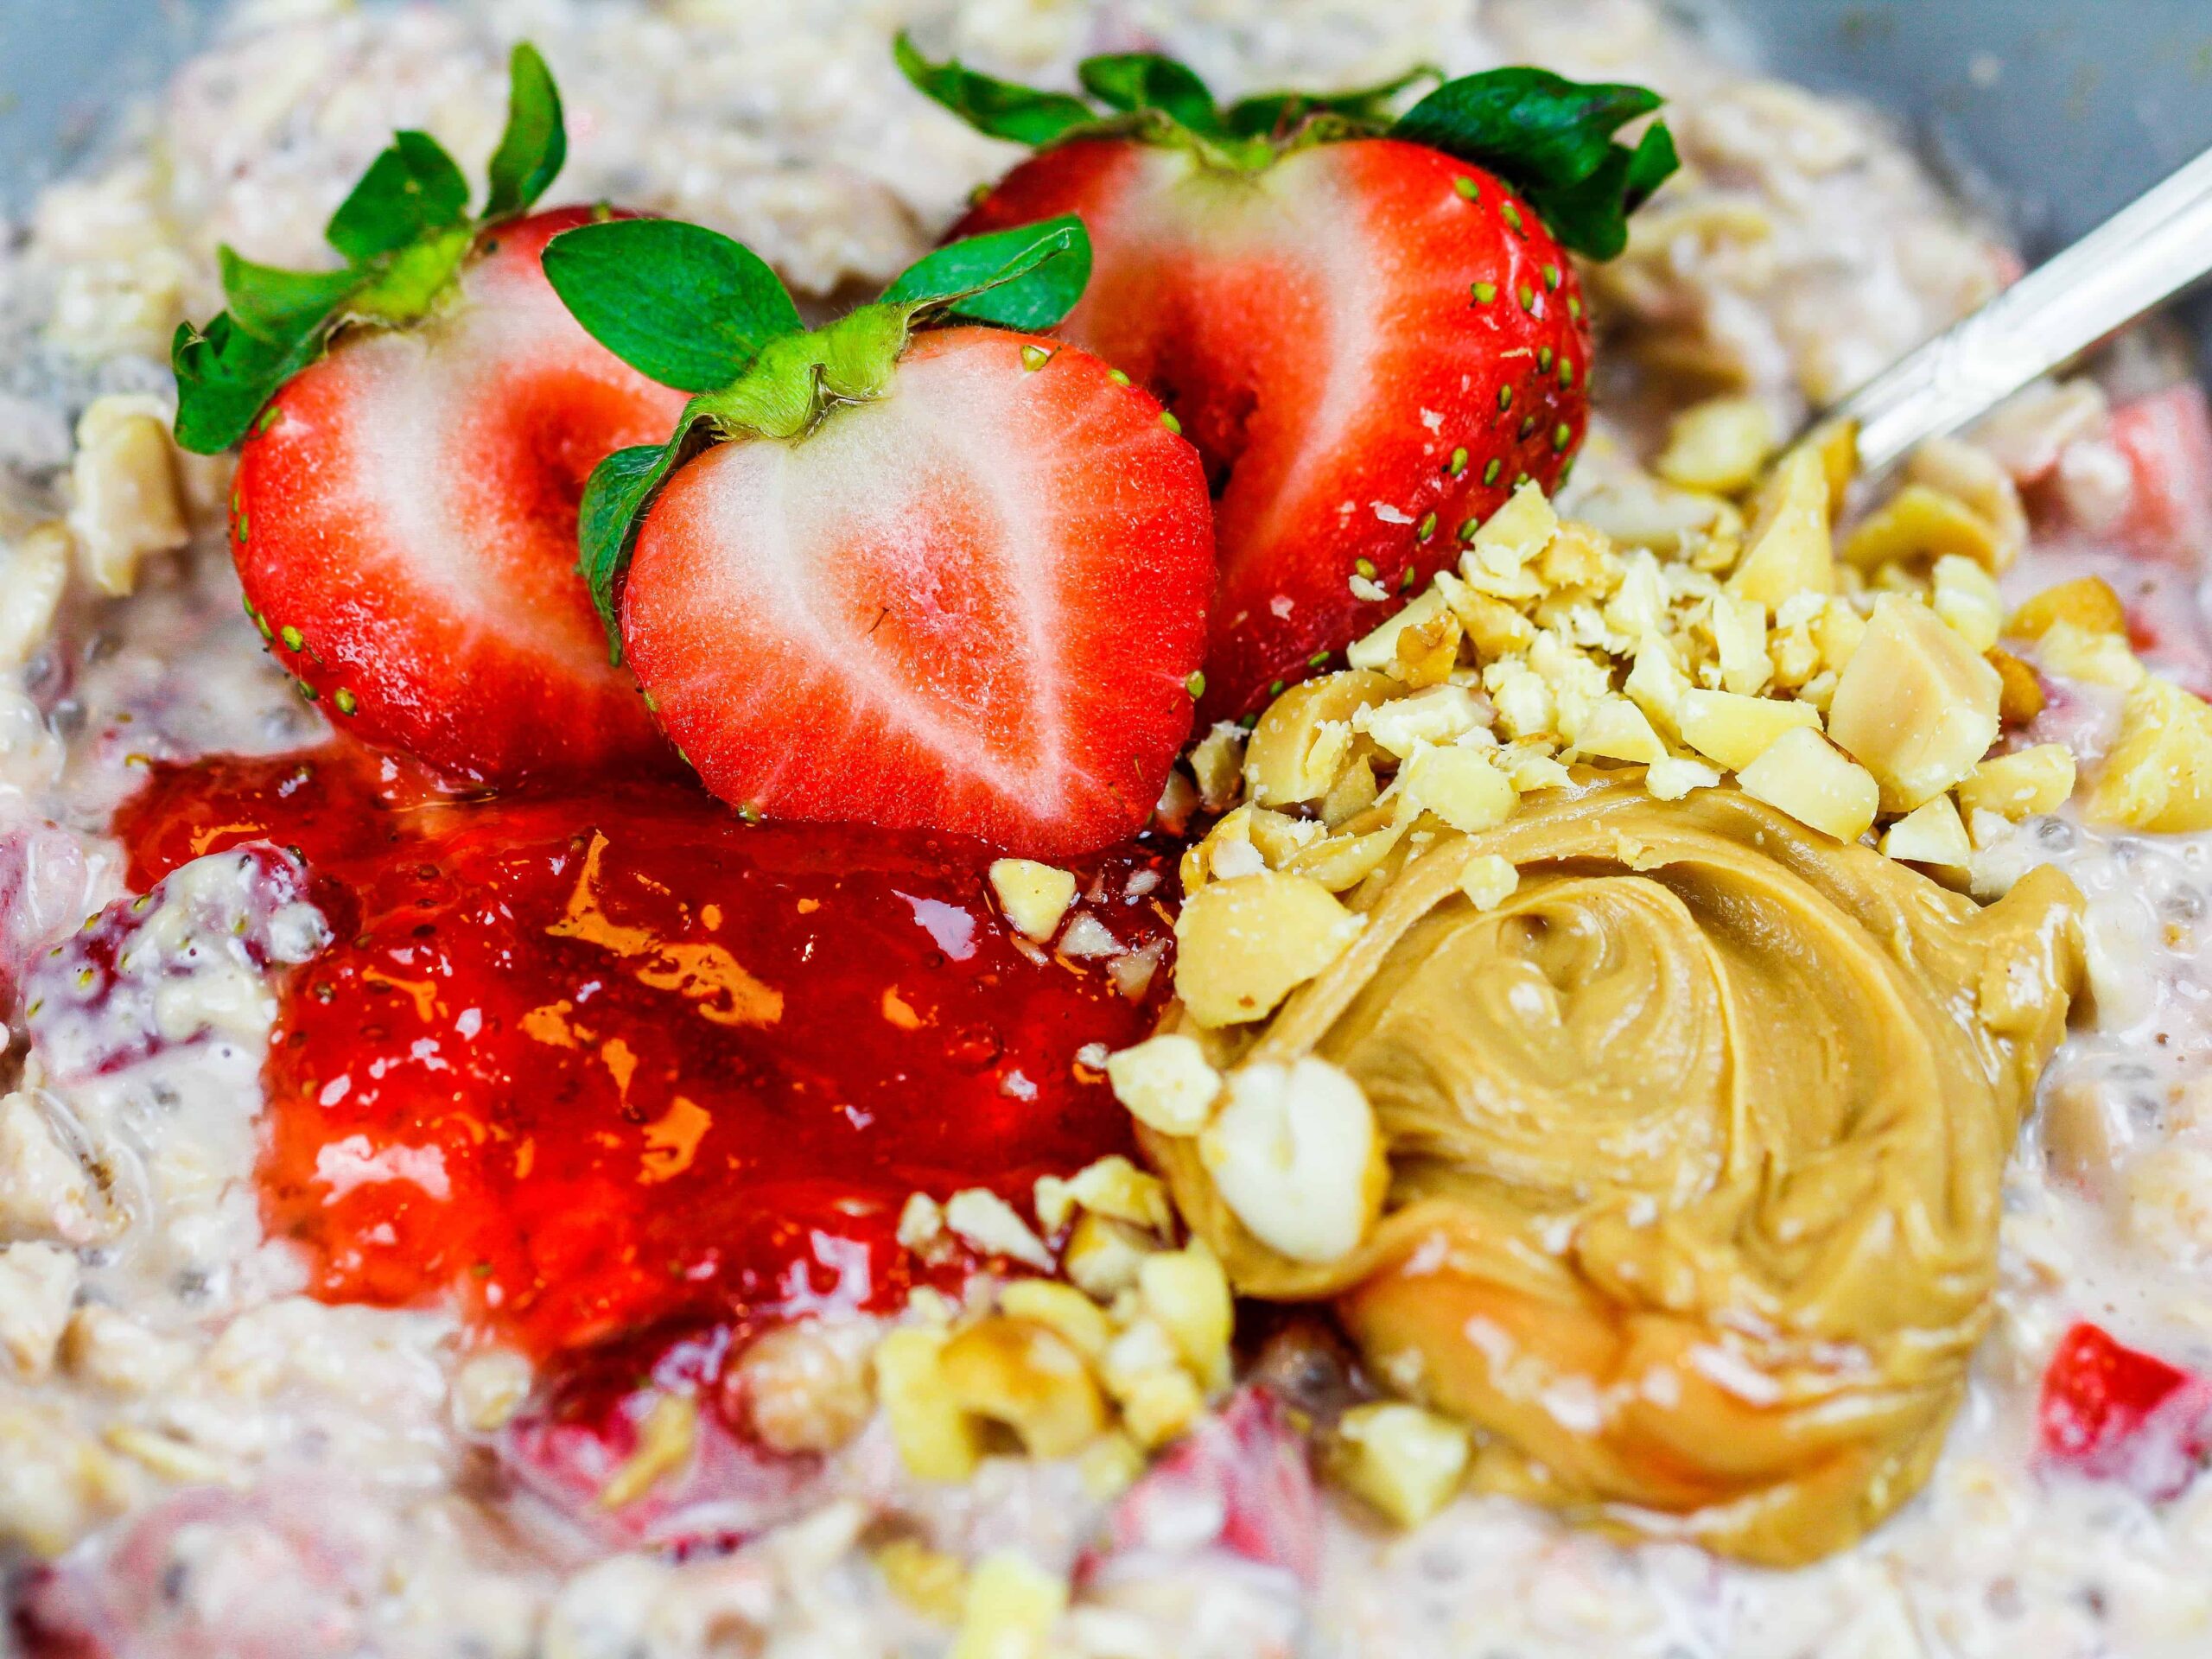 image of toppings added to peanut butter and jelly overnight oats